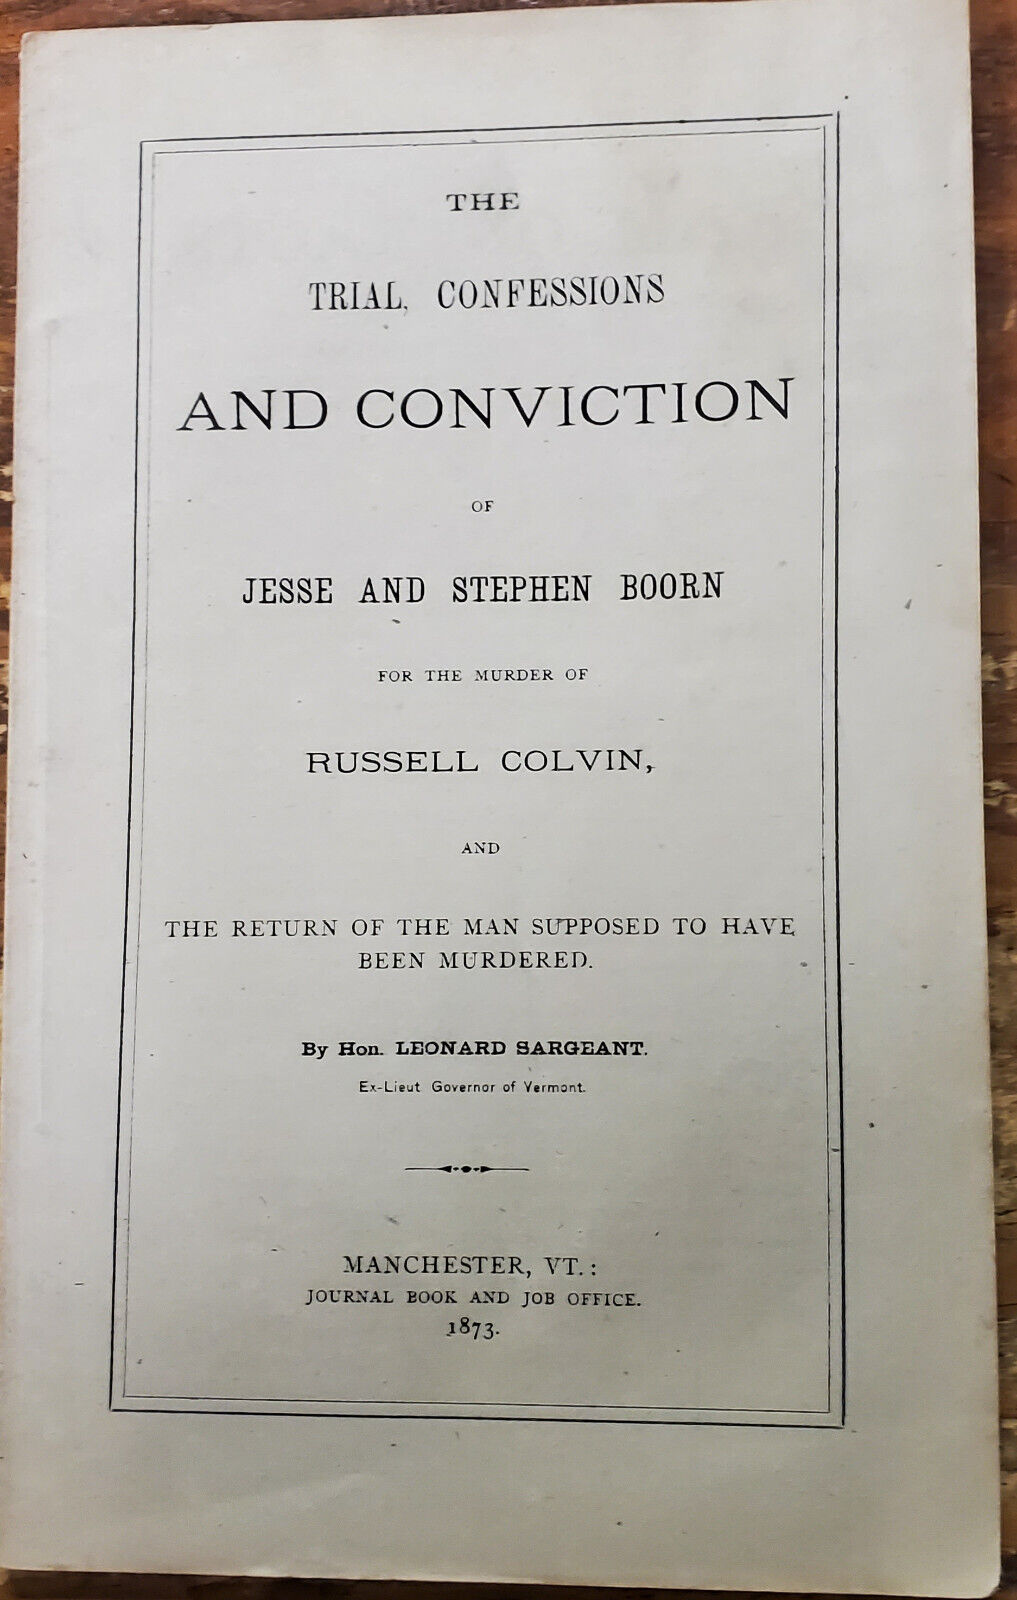 Confessions/Convictions Jesse&Stephen Boorn, Wrongful Conviction 1819